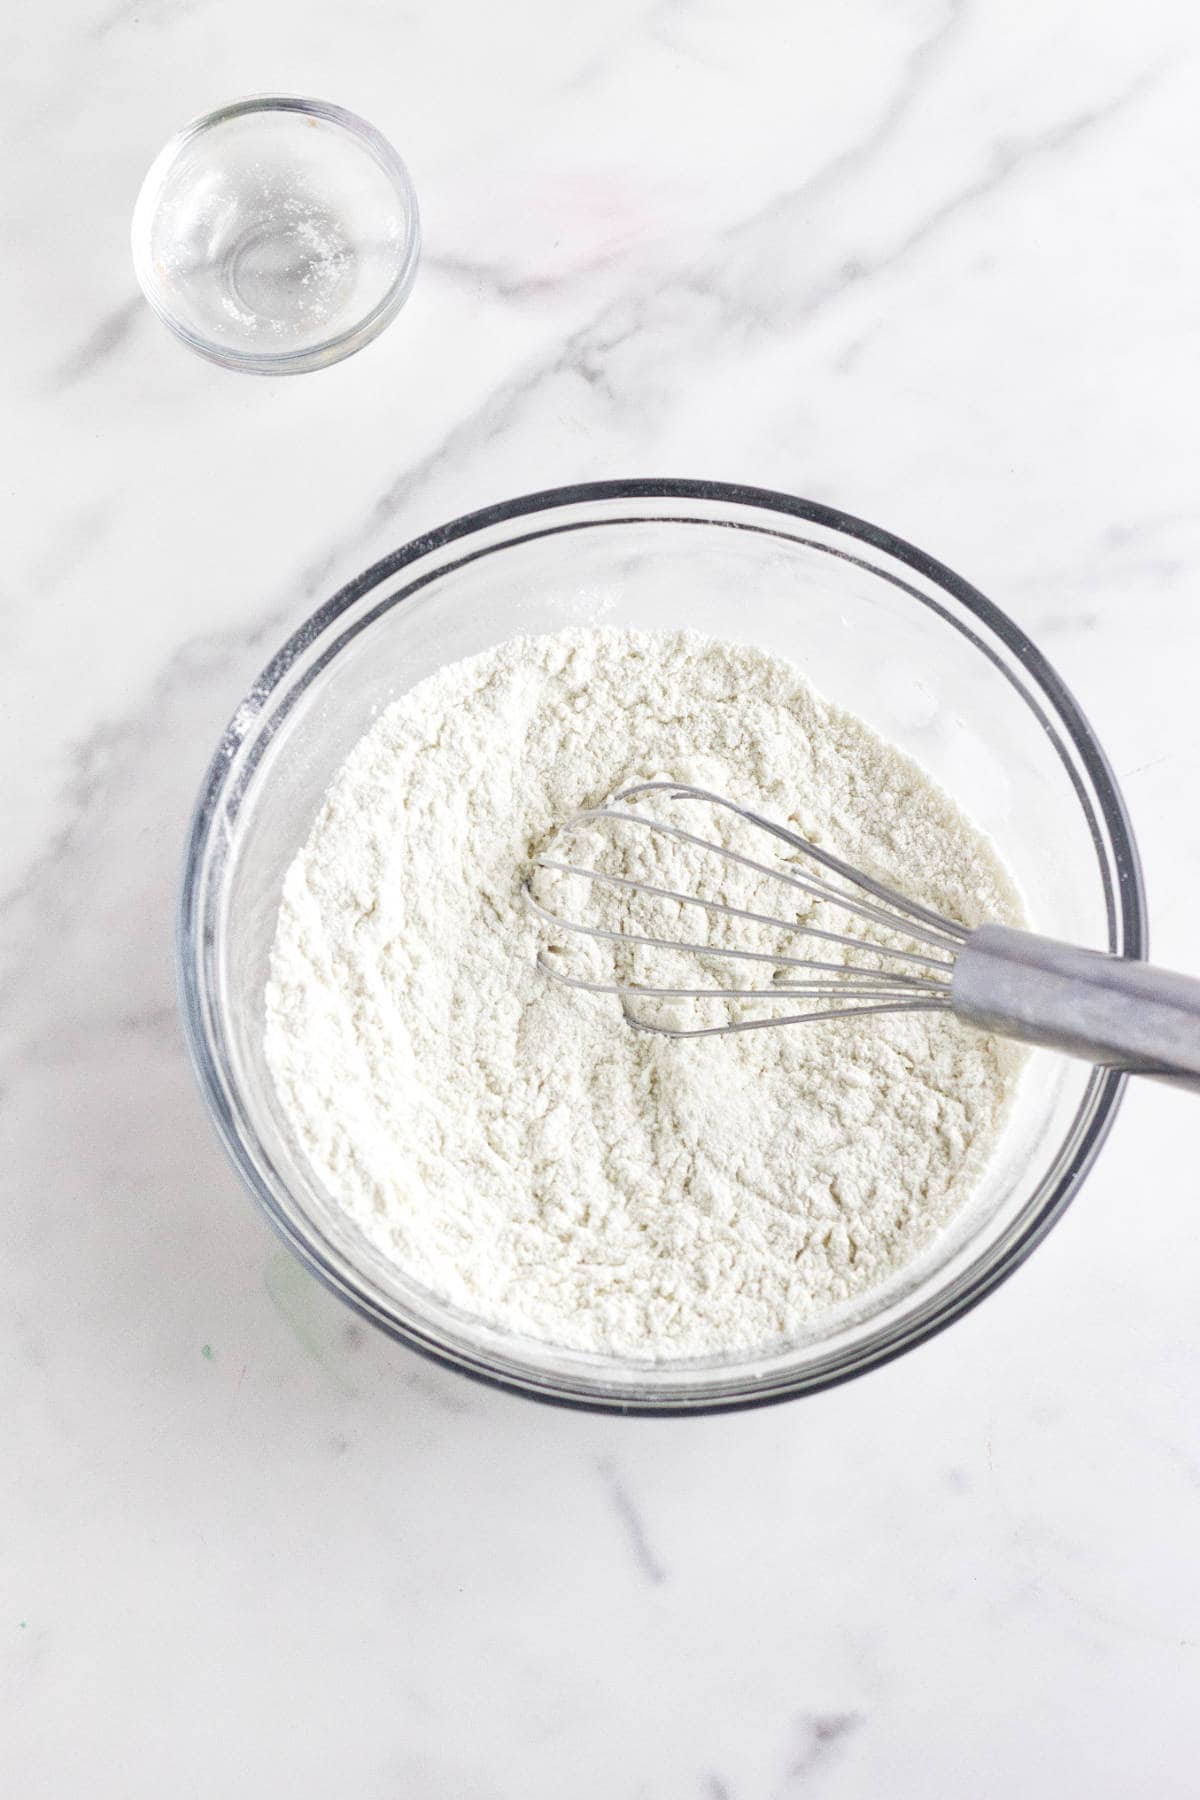 flour and salt whisked together in a bowl.